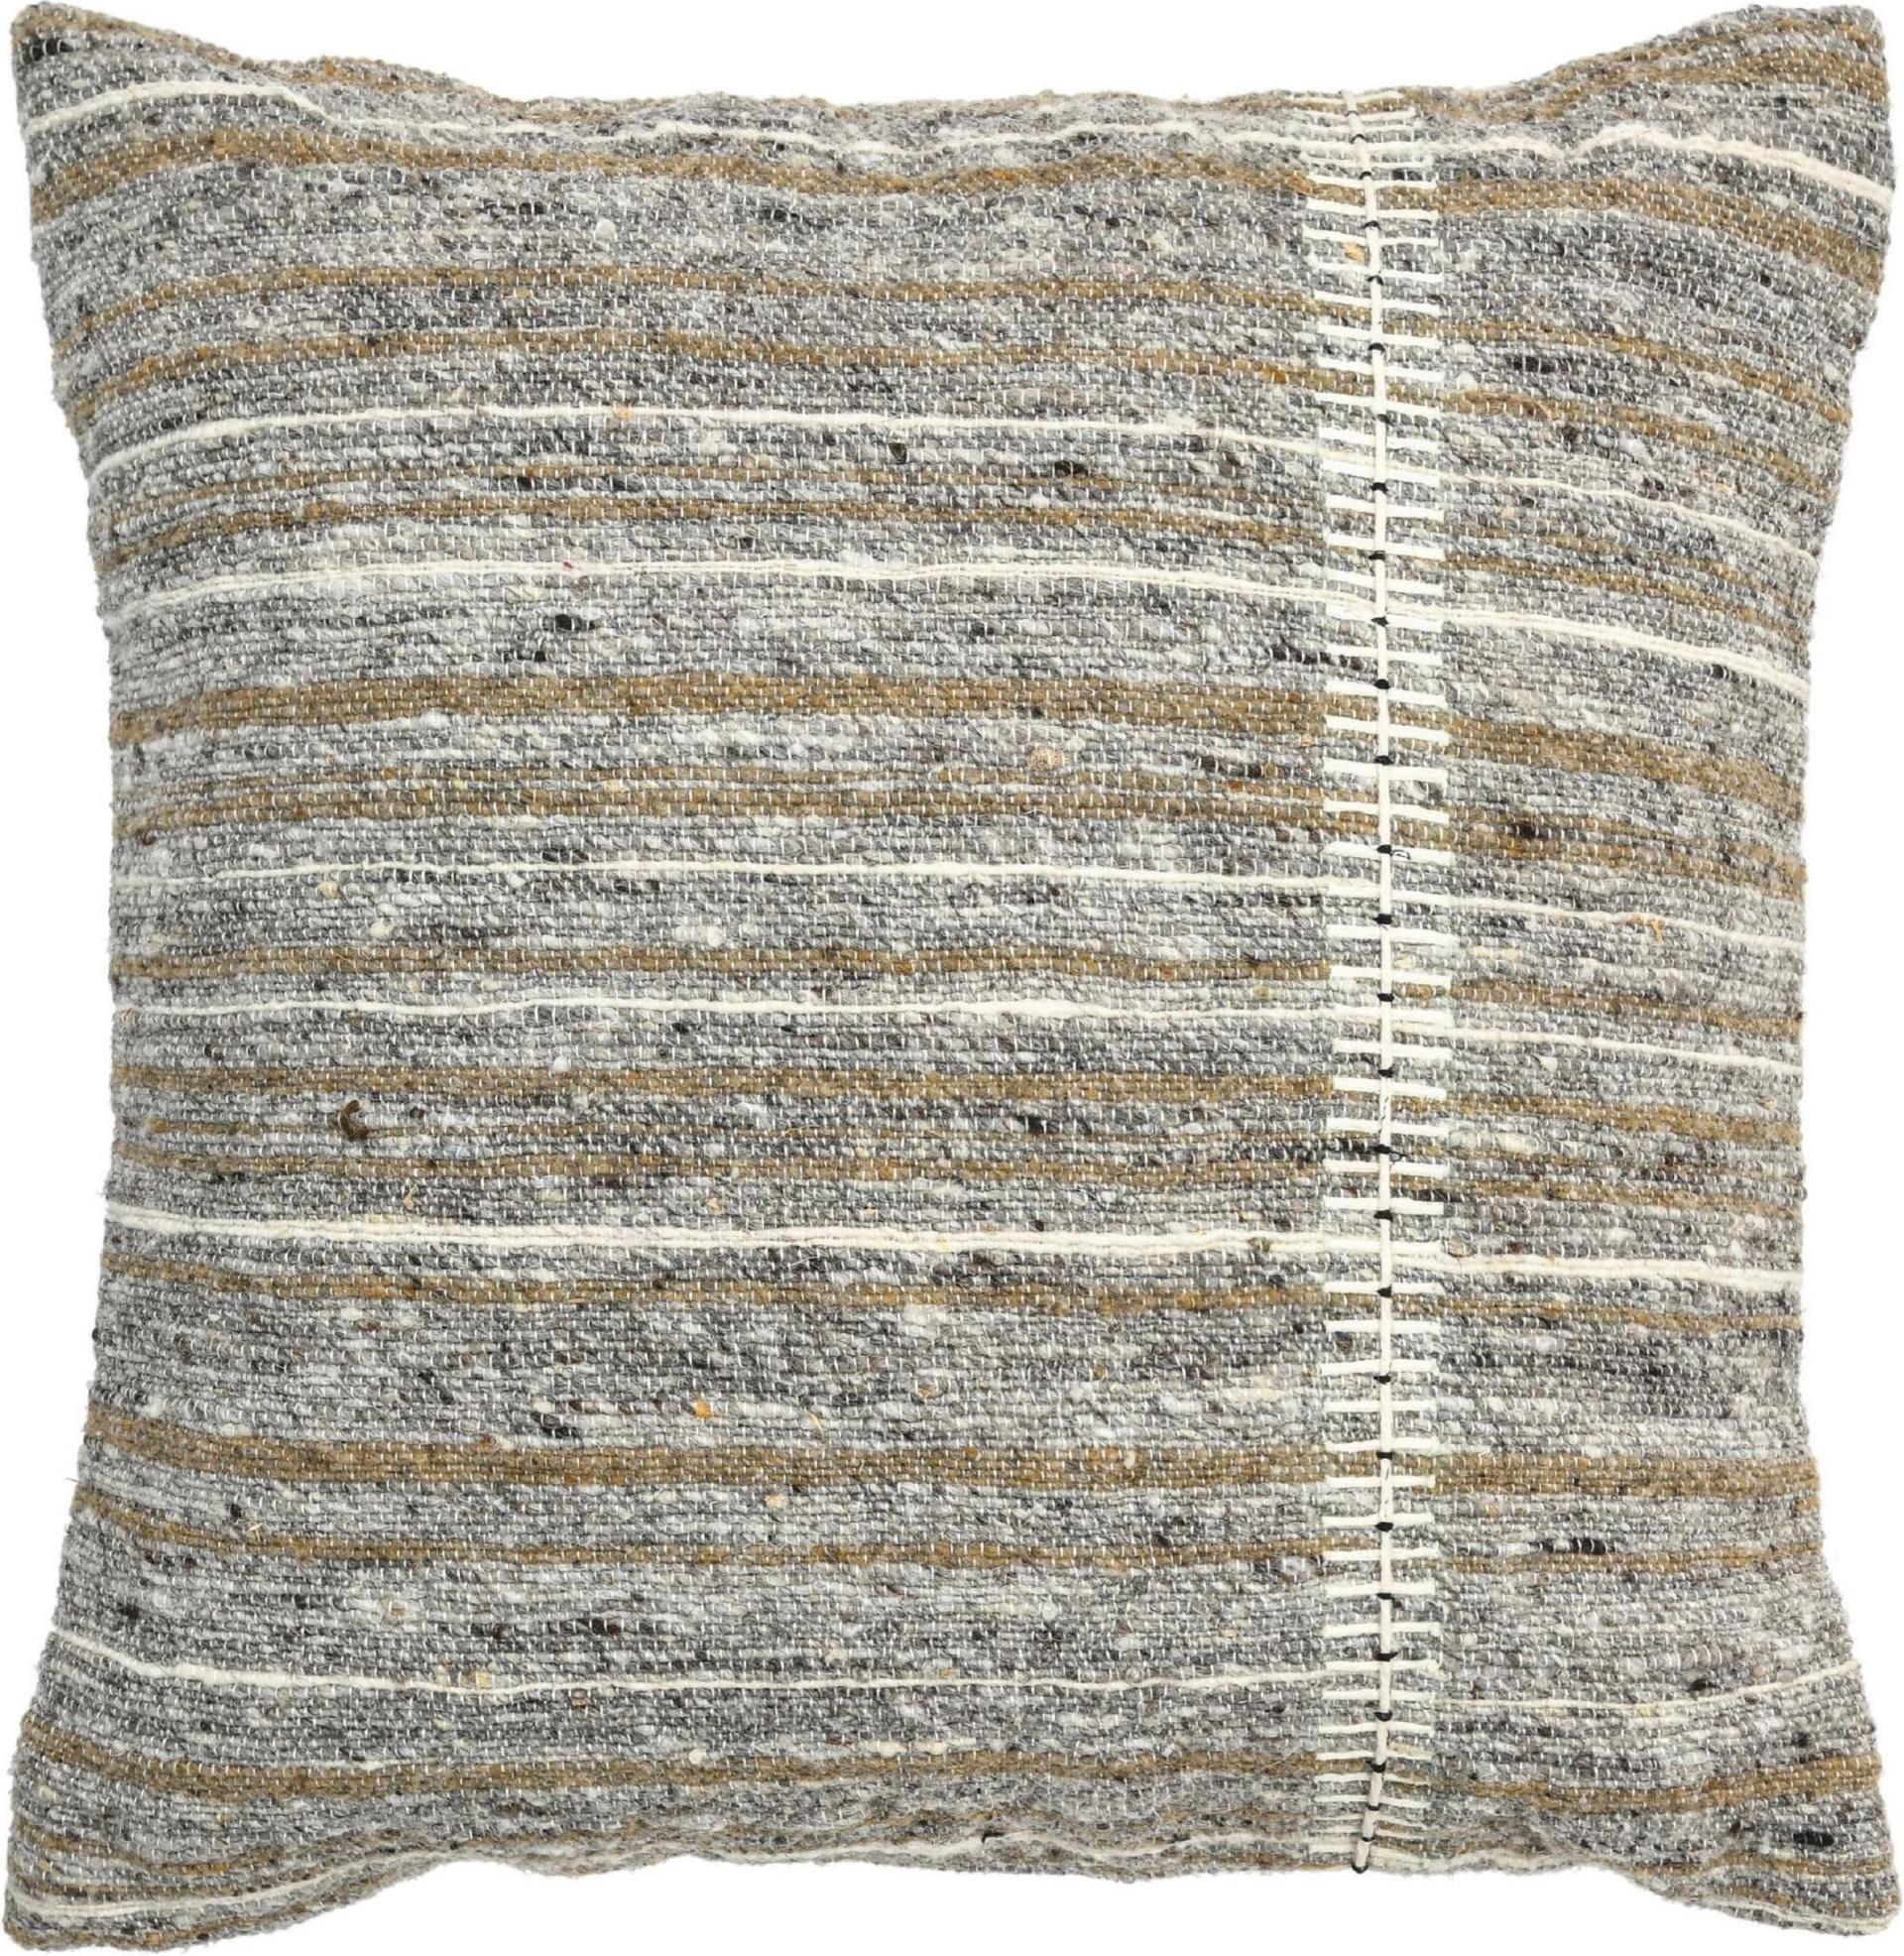 Boho Chic Style Modern Wool and Cotton Pillow In Muted Tones In New Condition For Sale In Norwalk, CT